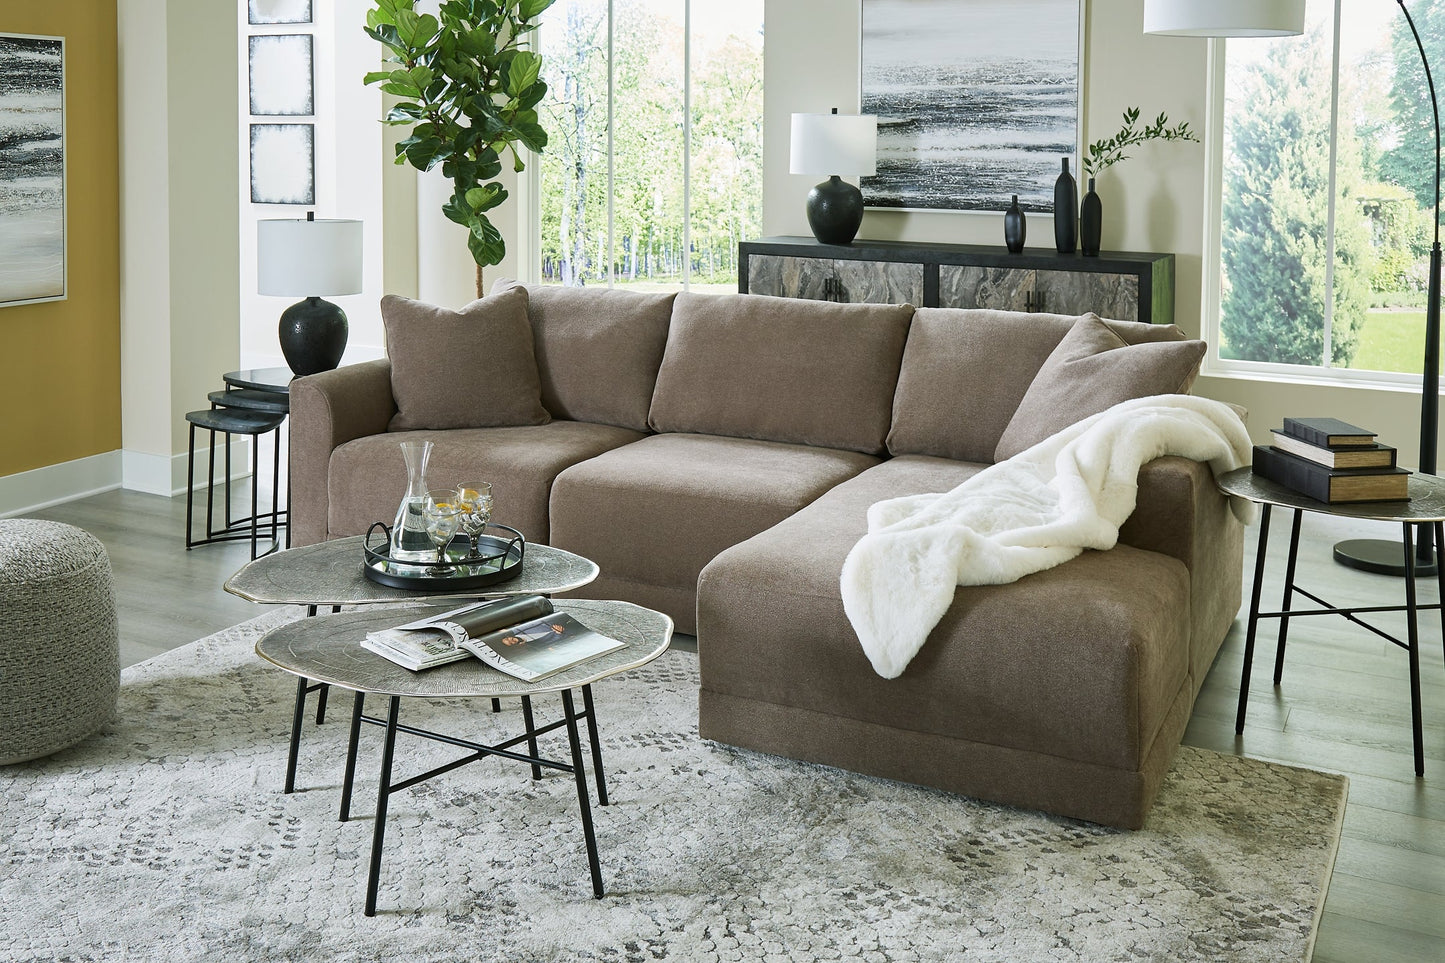 Raeanna 3-Piece Sectional Sofa with Chaise Rent Wise Rent To Own Jacksonville, Florida